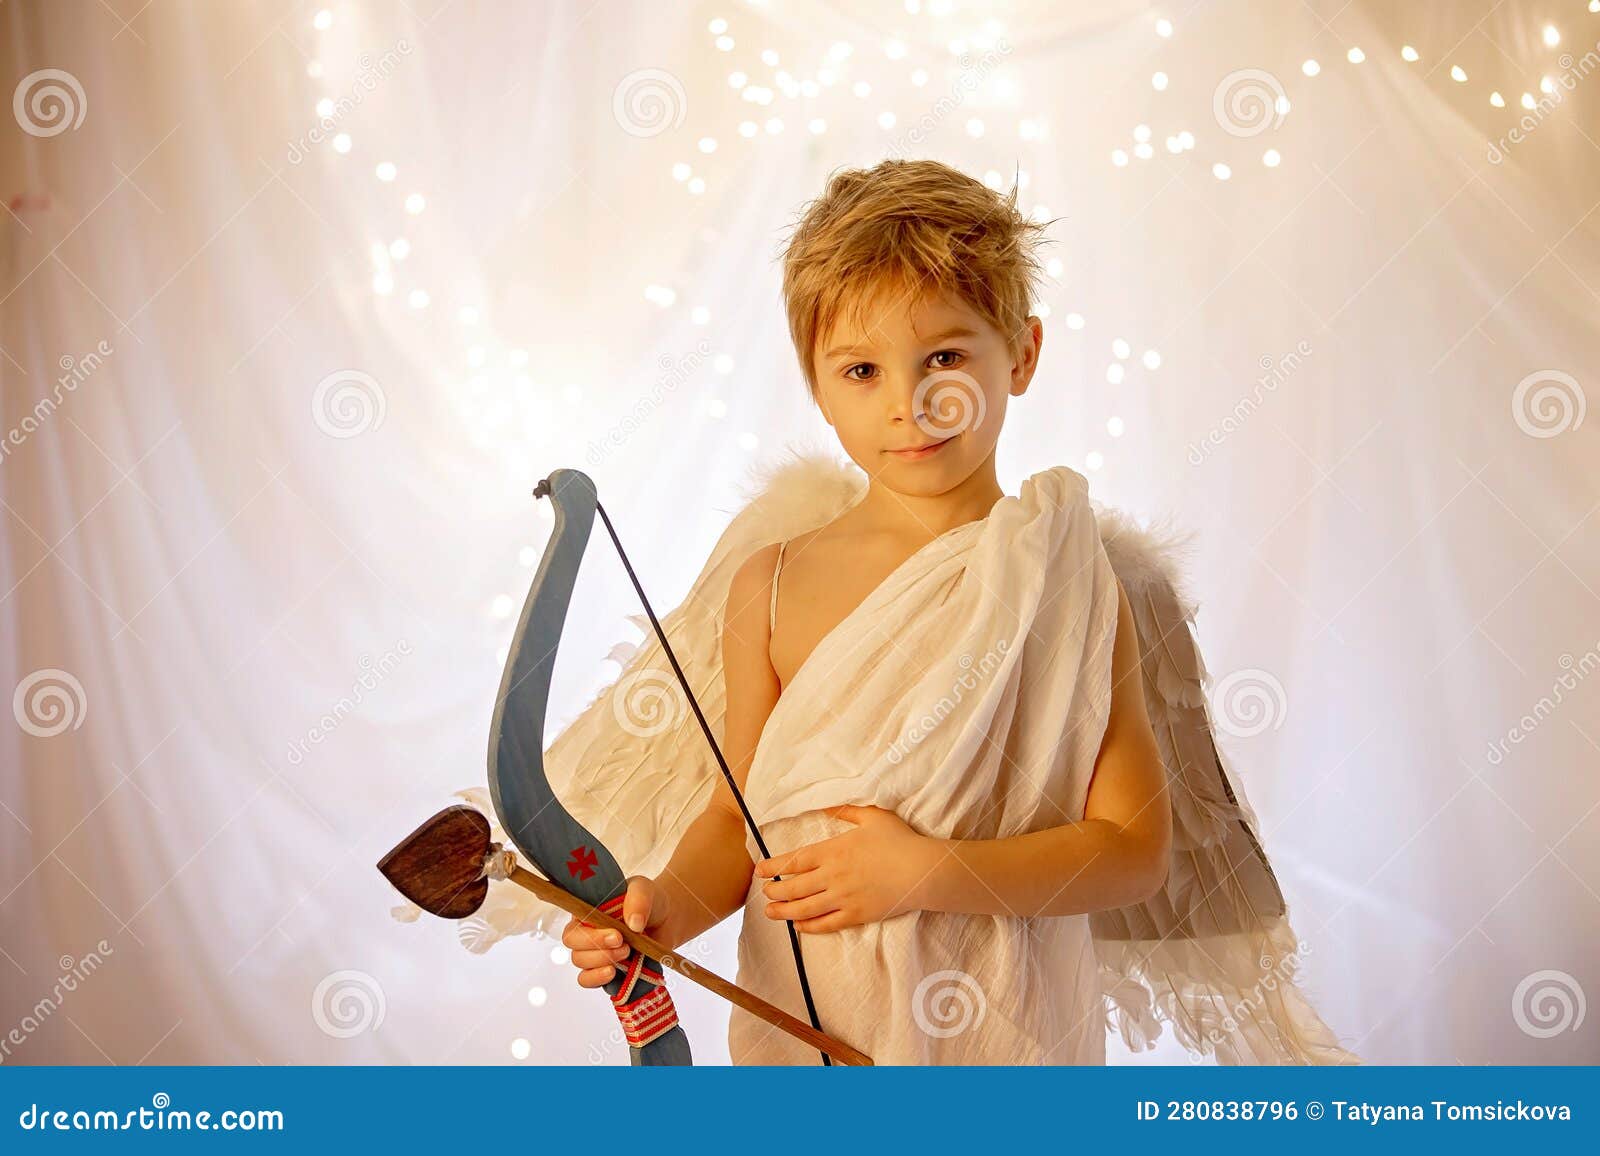 little cupid toddle boy, holding bow and arrow, beautiful blond cherub